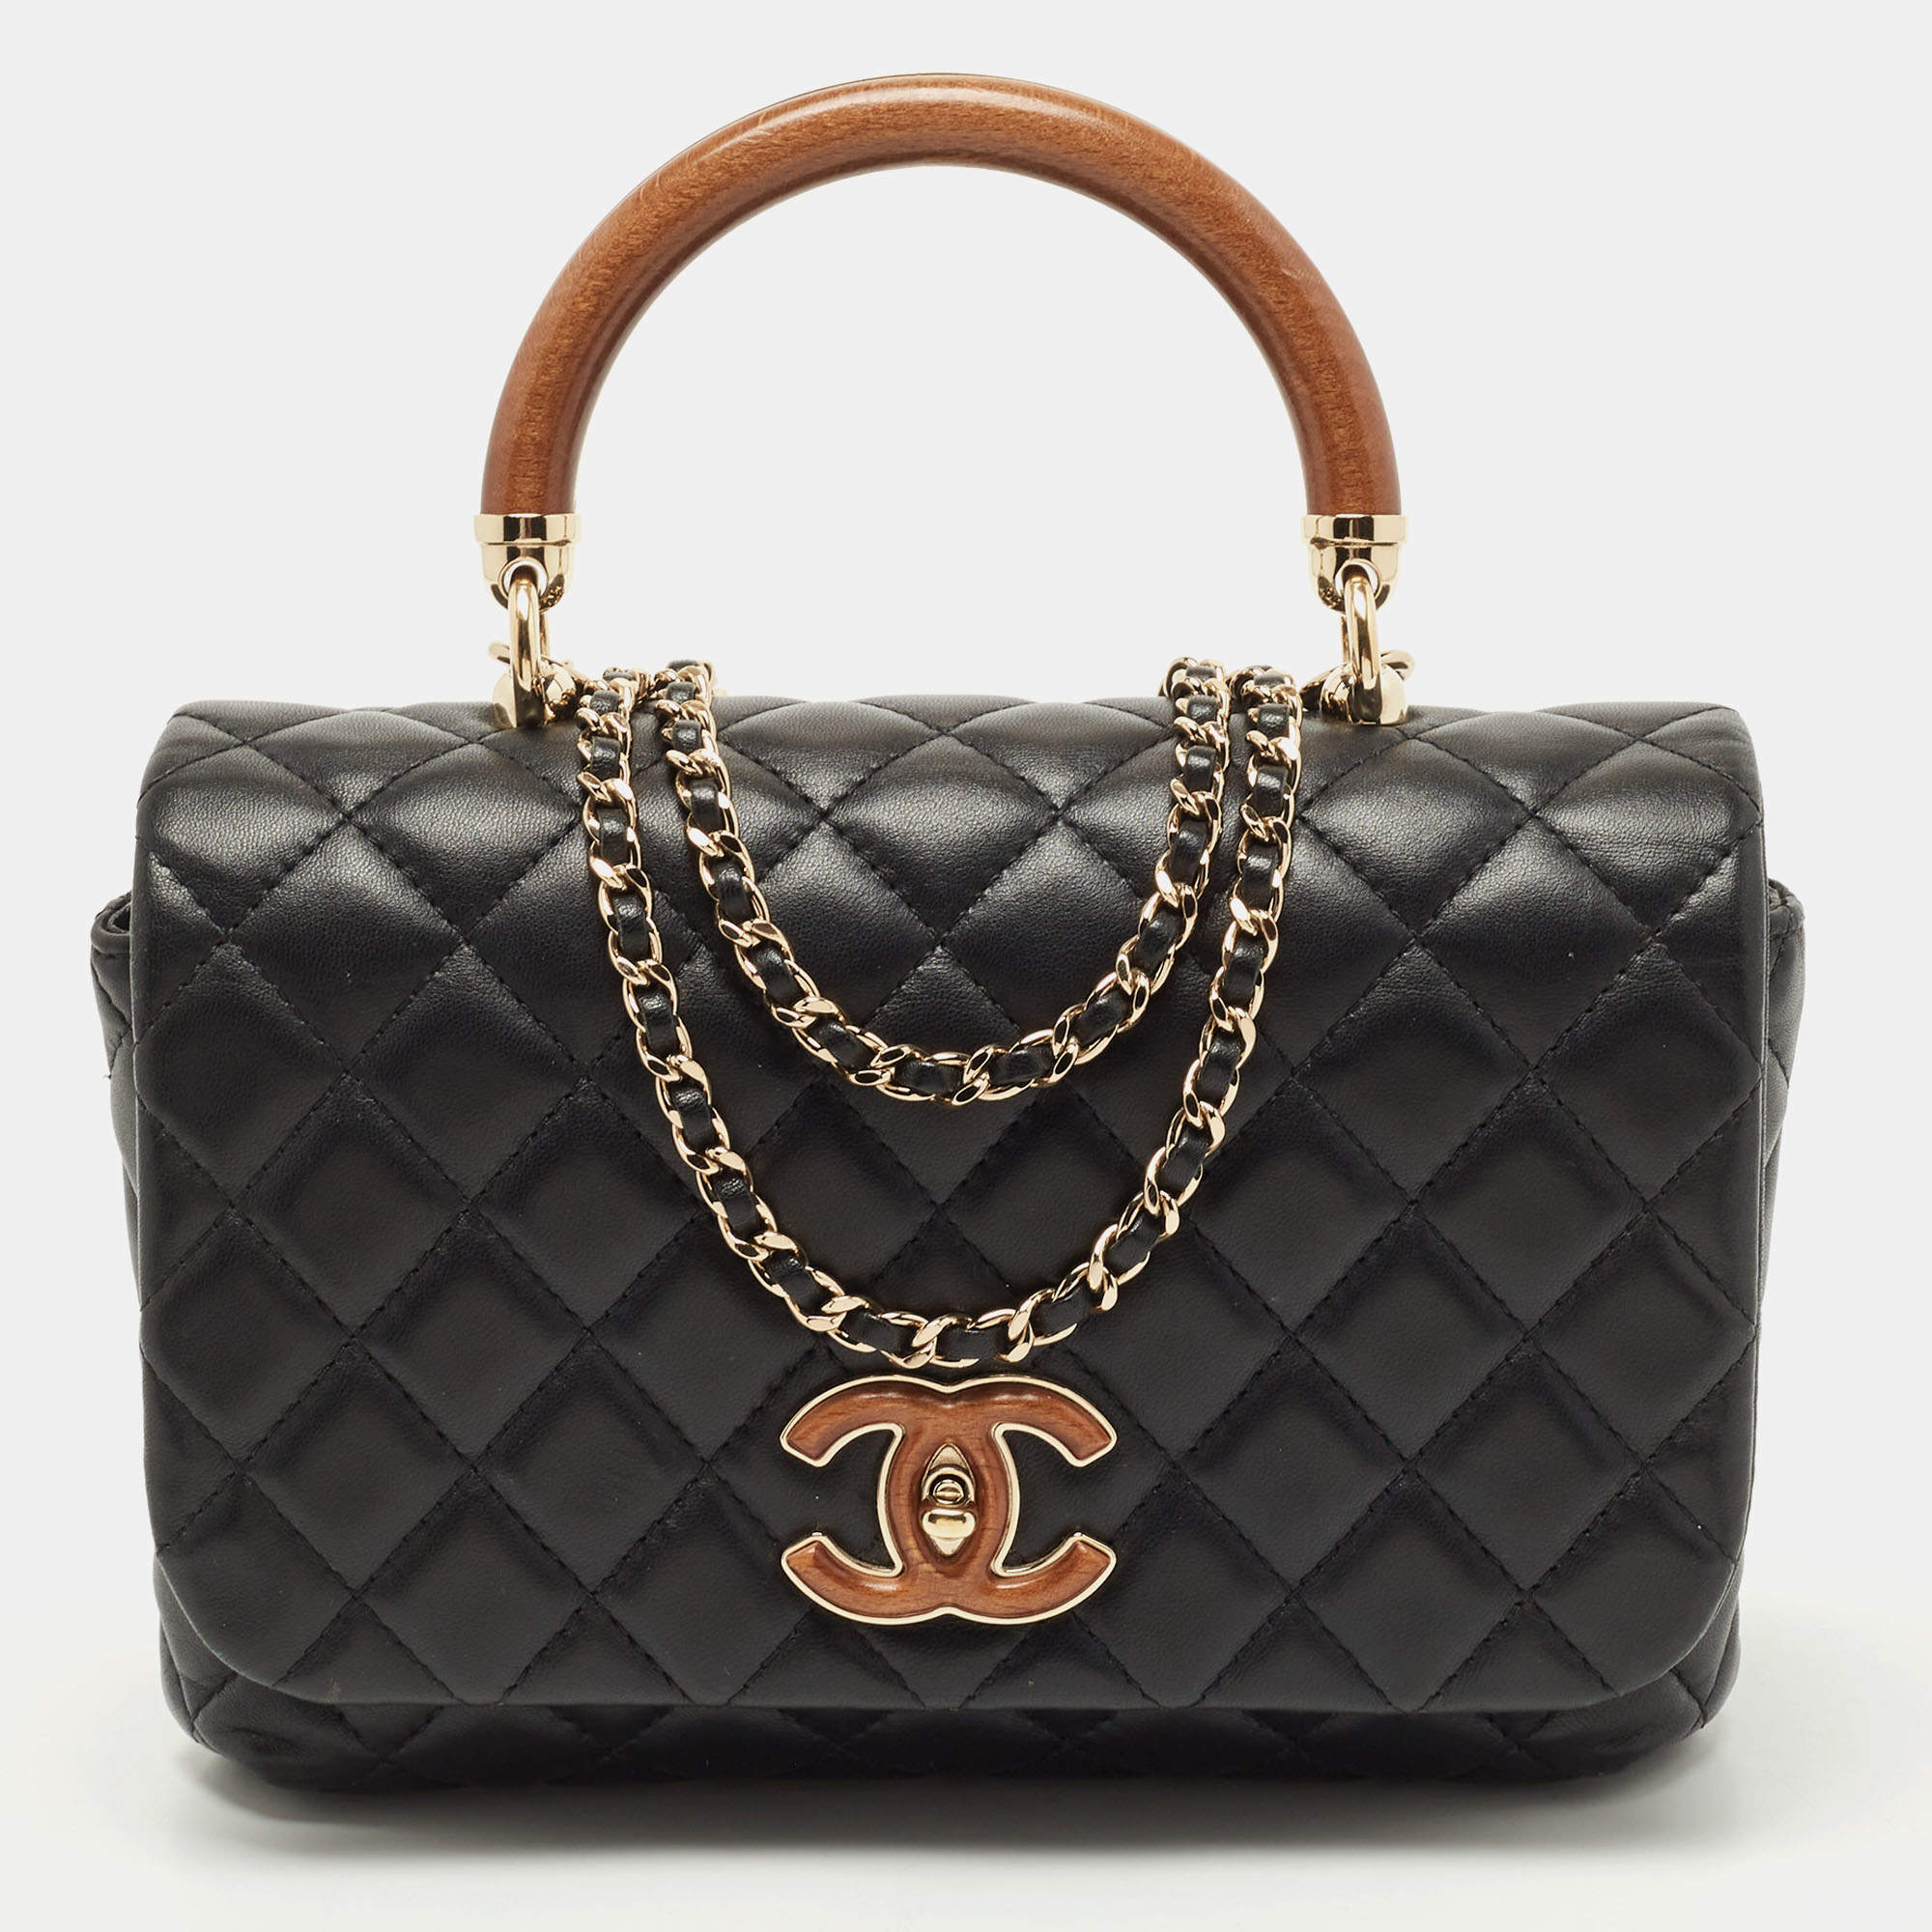 Sold at Auction: Chanel, Coated Canvas Wood Handle Kelly Bag